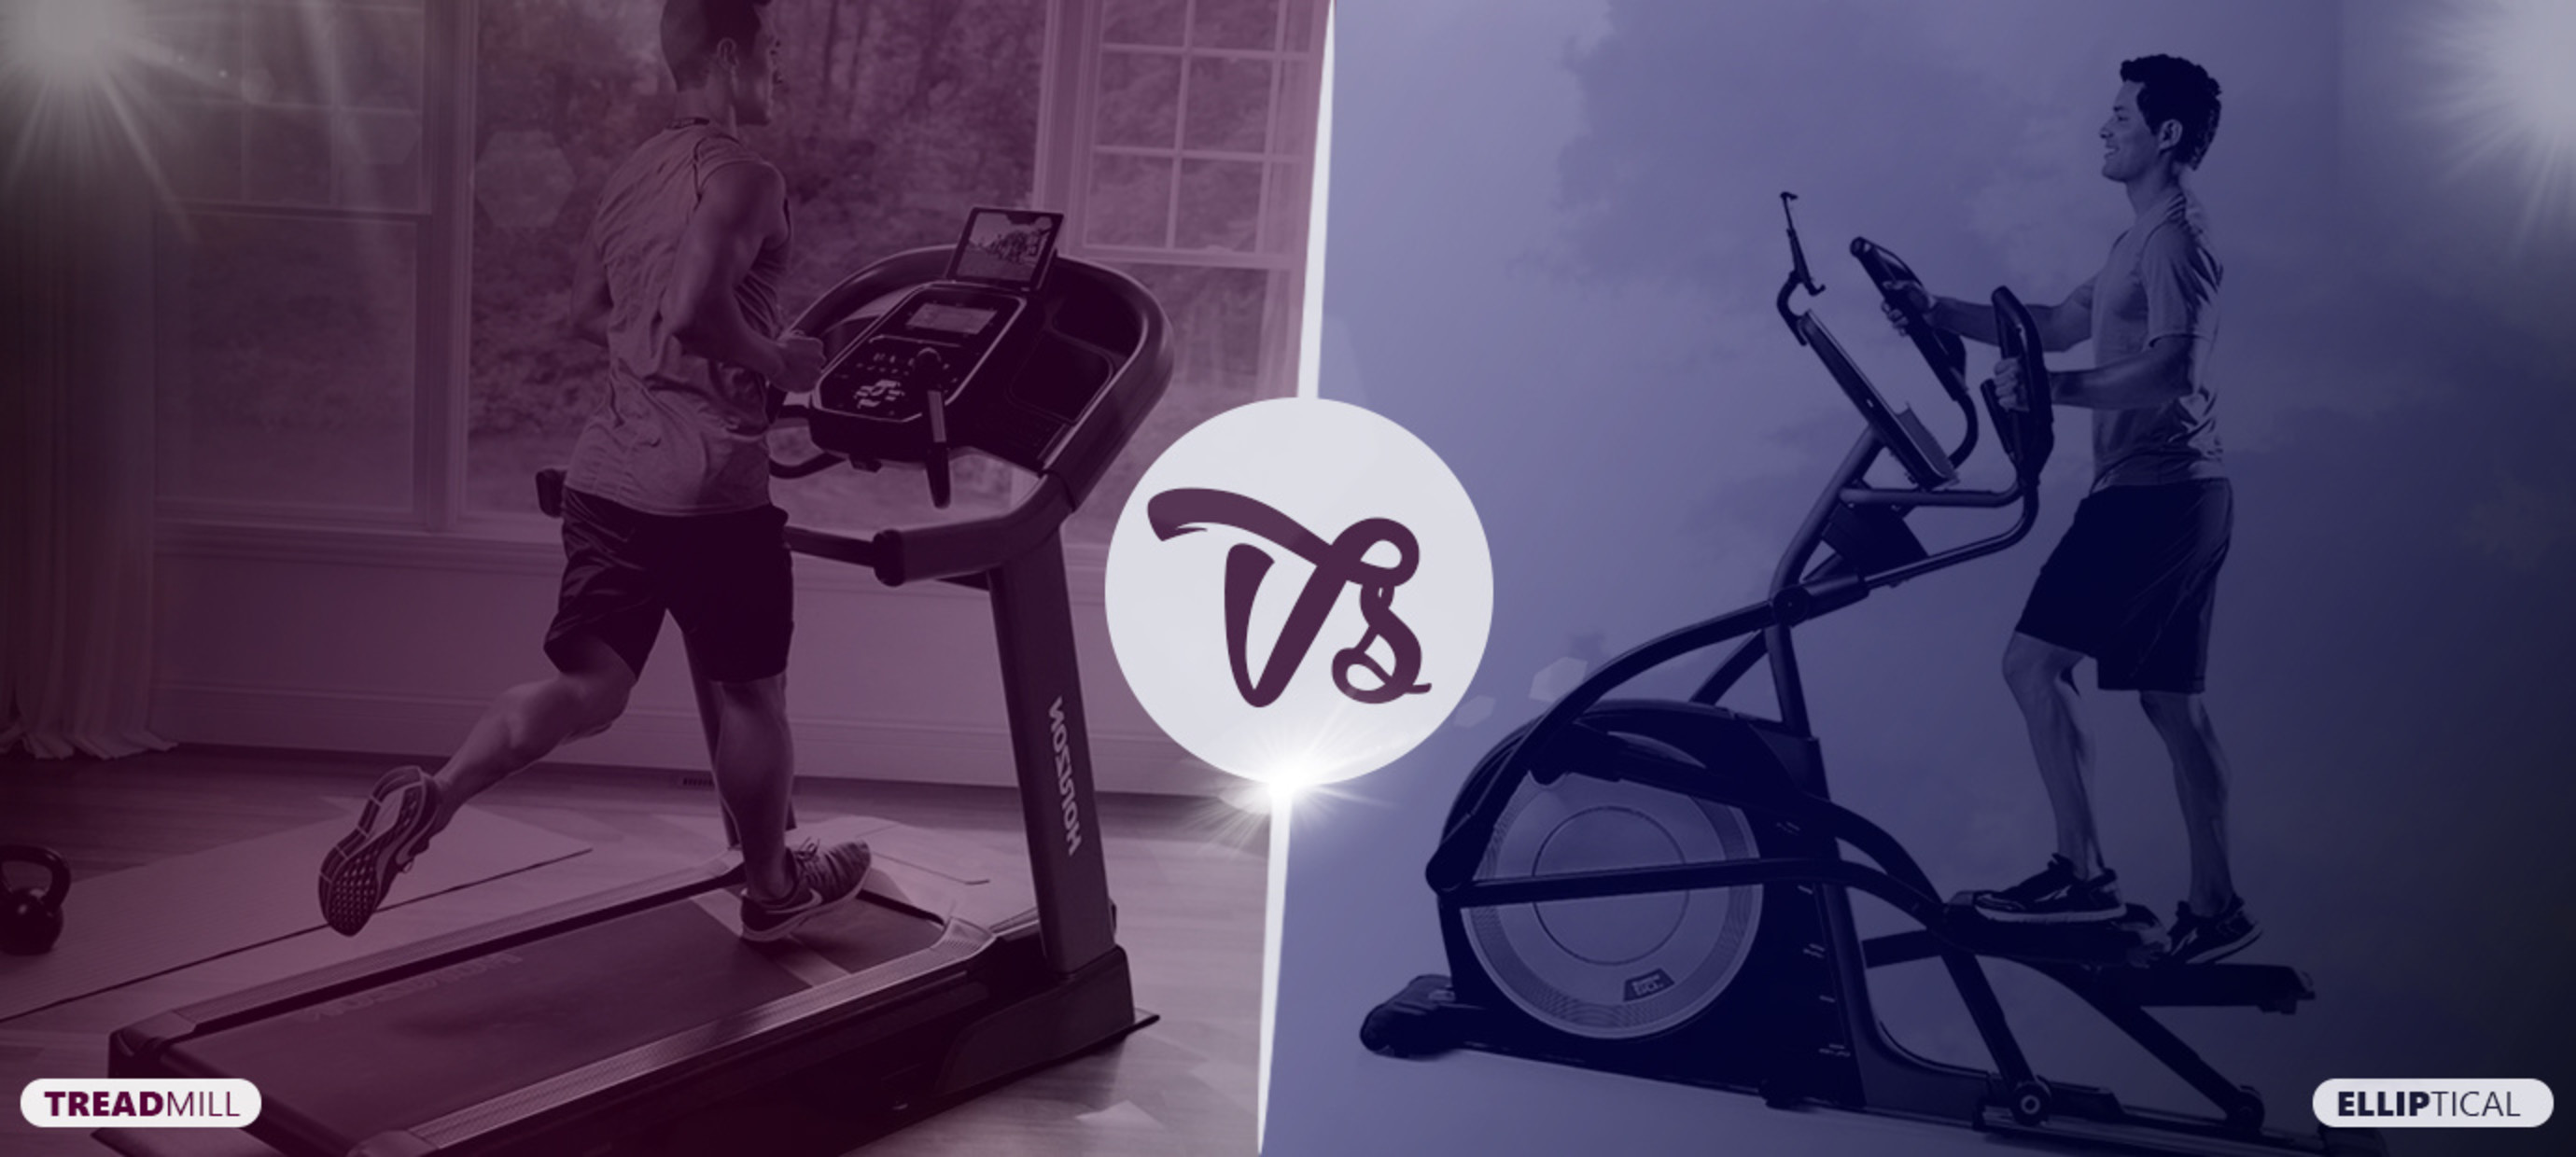 Treadmill vs Elliptical: Which One Is Right for Me?